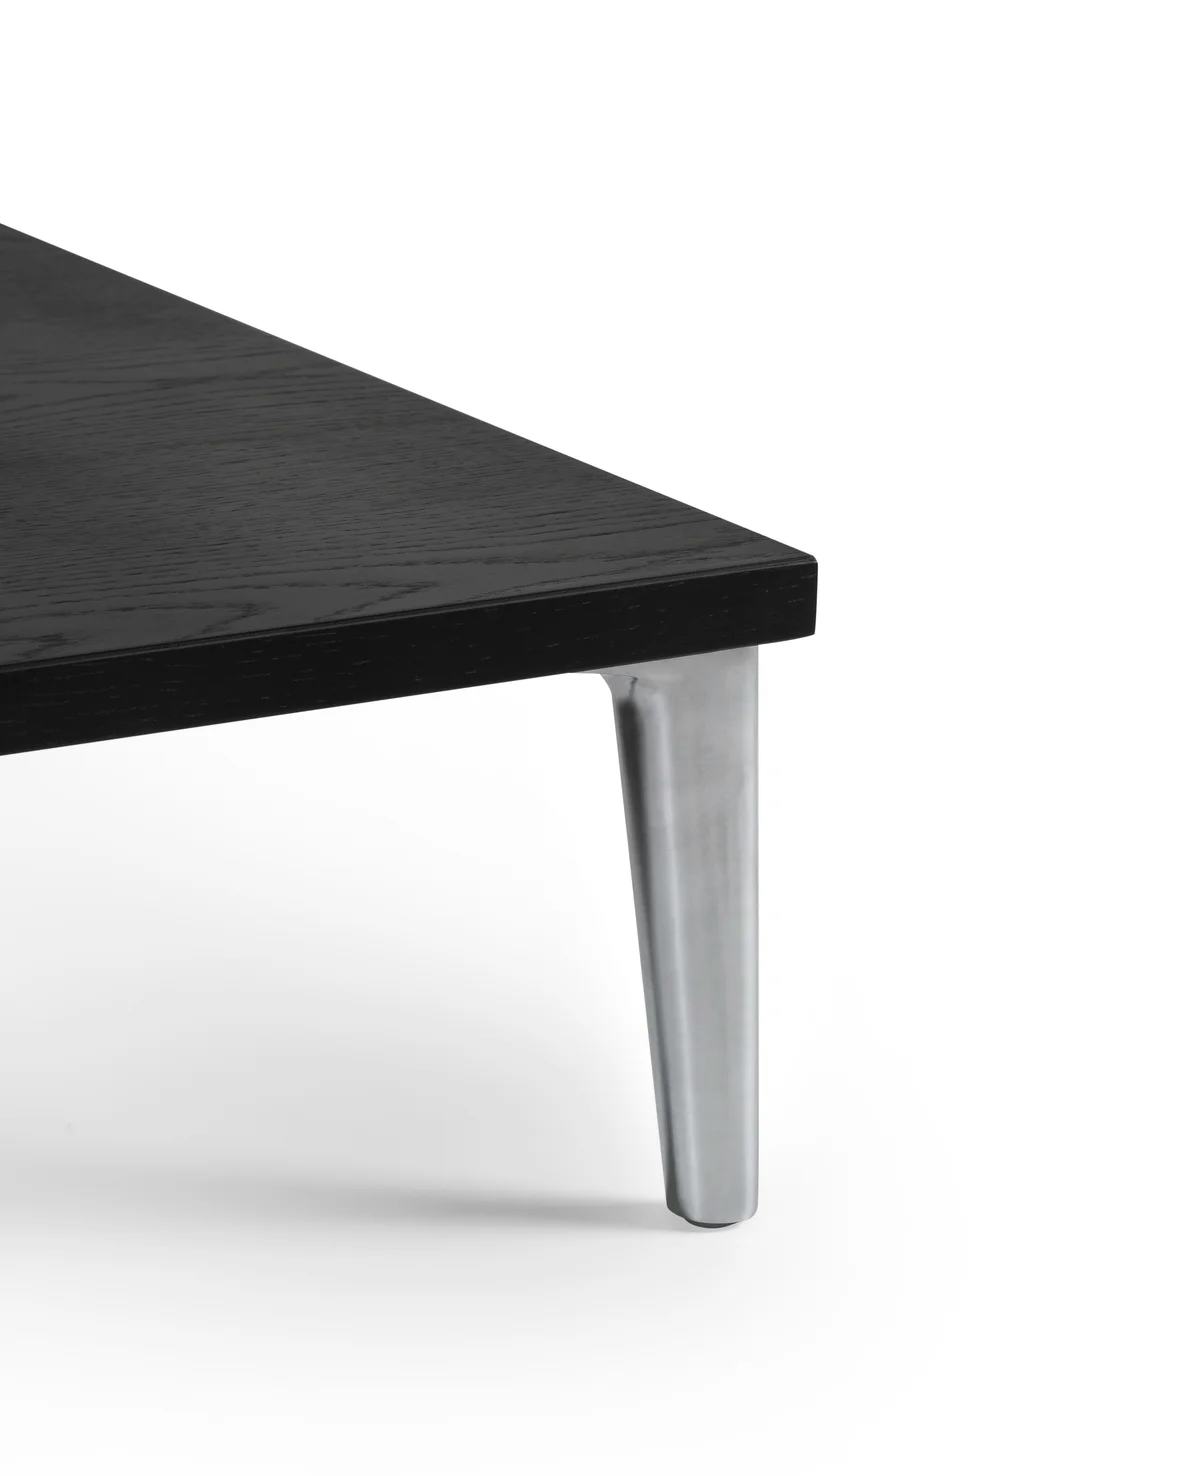 Sofa So Good demi table detail black stained oak